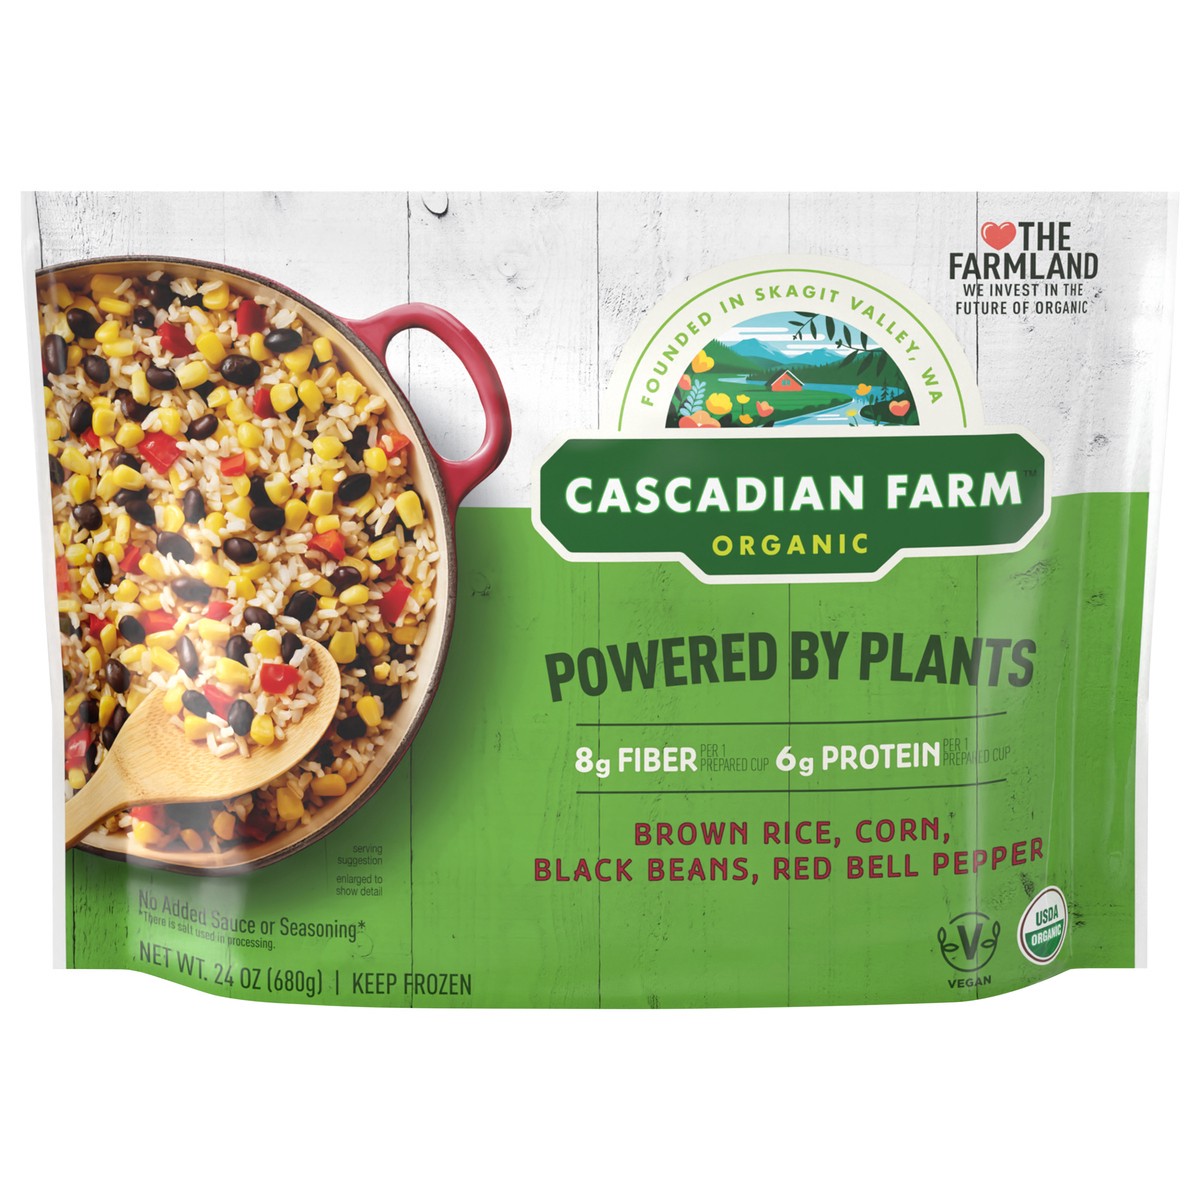 slide 1 of 9, Cascadian Farm Organic Powered By Plants Frozen Vegetables – Brown Rice, Corn, Black Beans and Red Bell Pepper, 24 oz., 24 oz